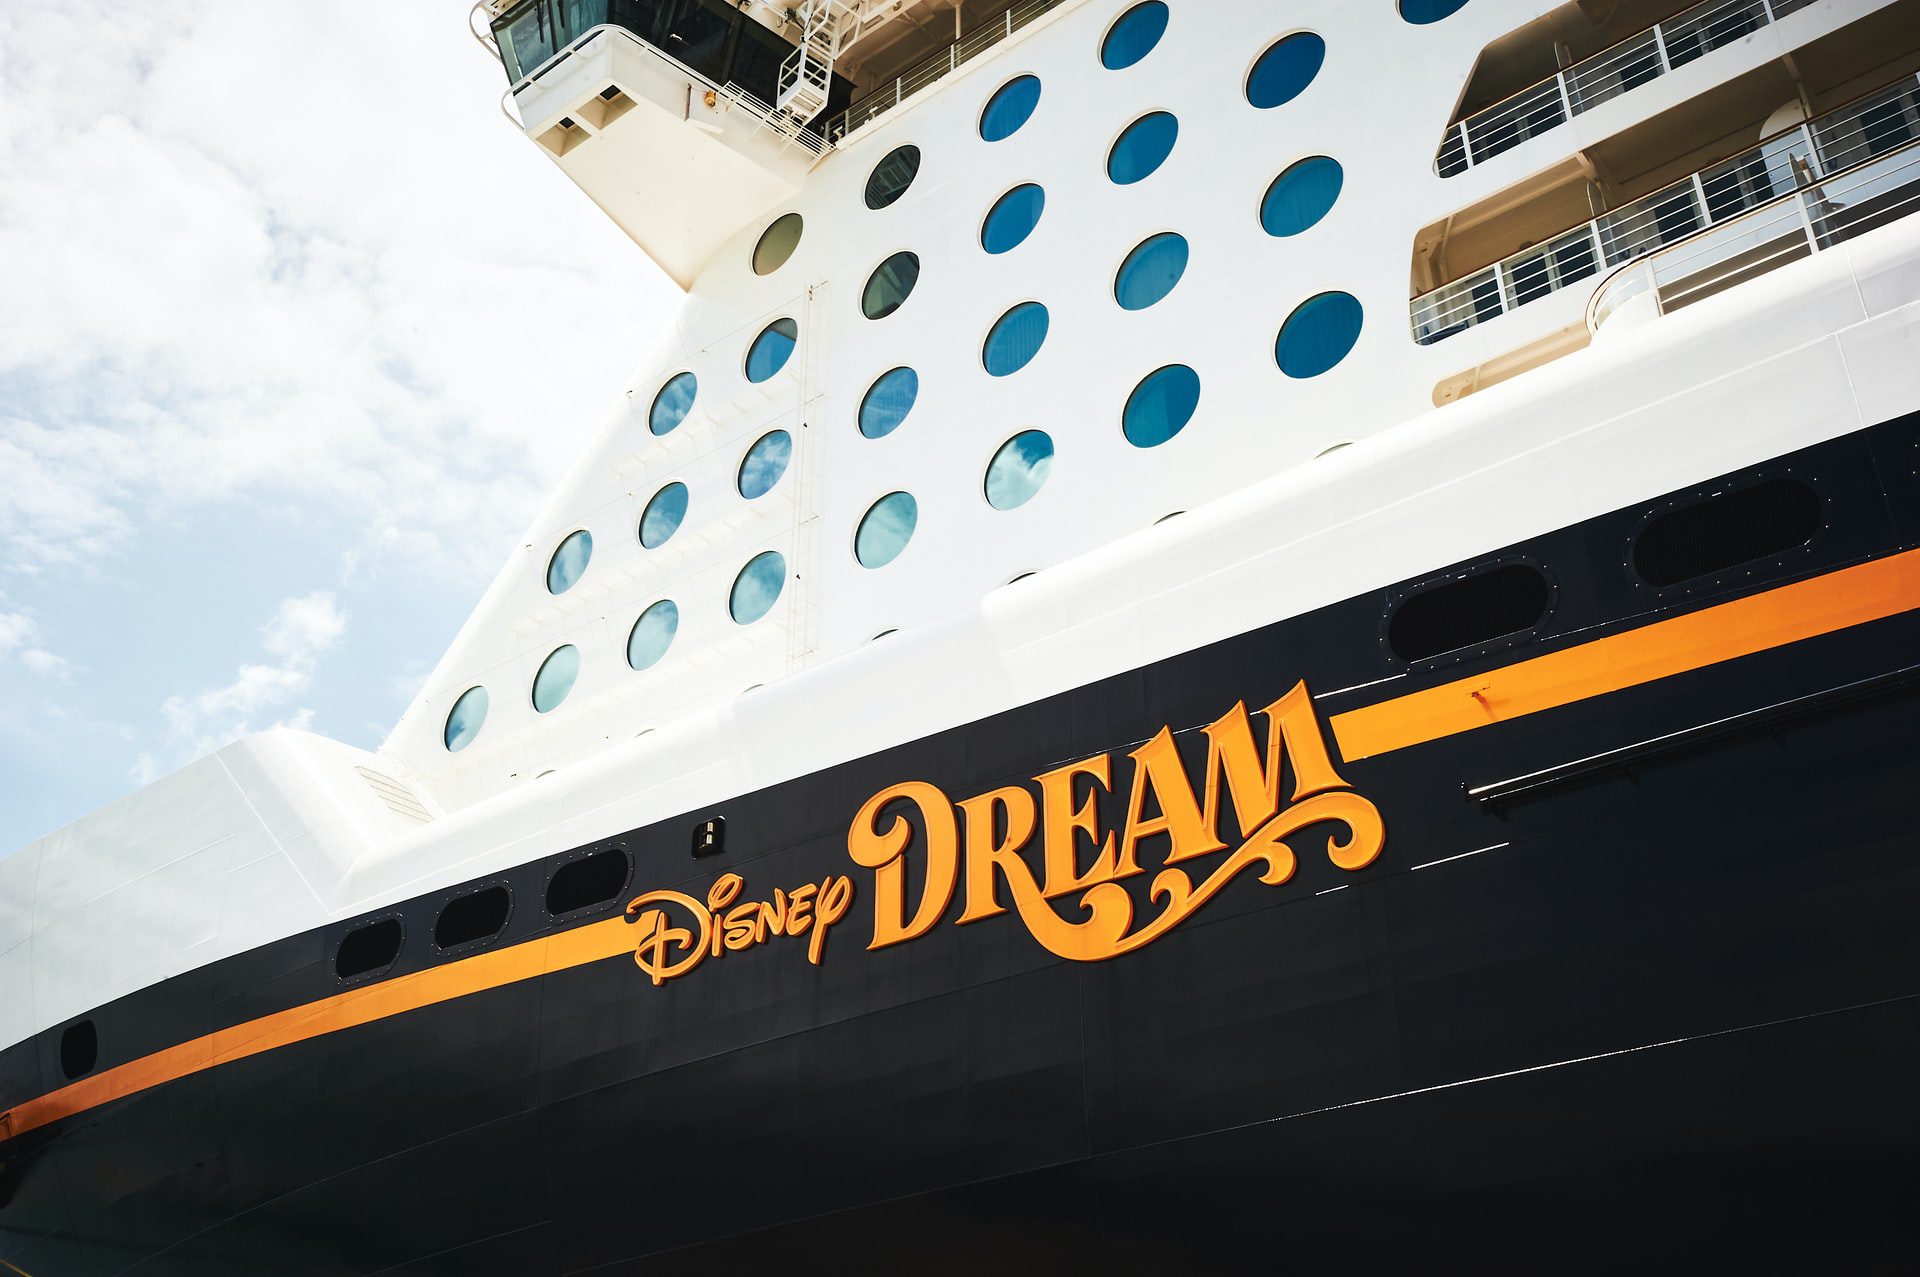 Disney Dream will depart from Port Canaveral, Florida on Aug. 9 to the Bahamas.